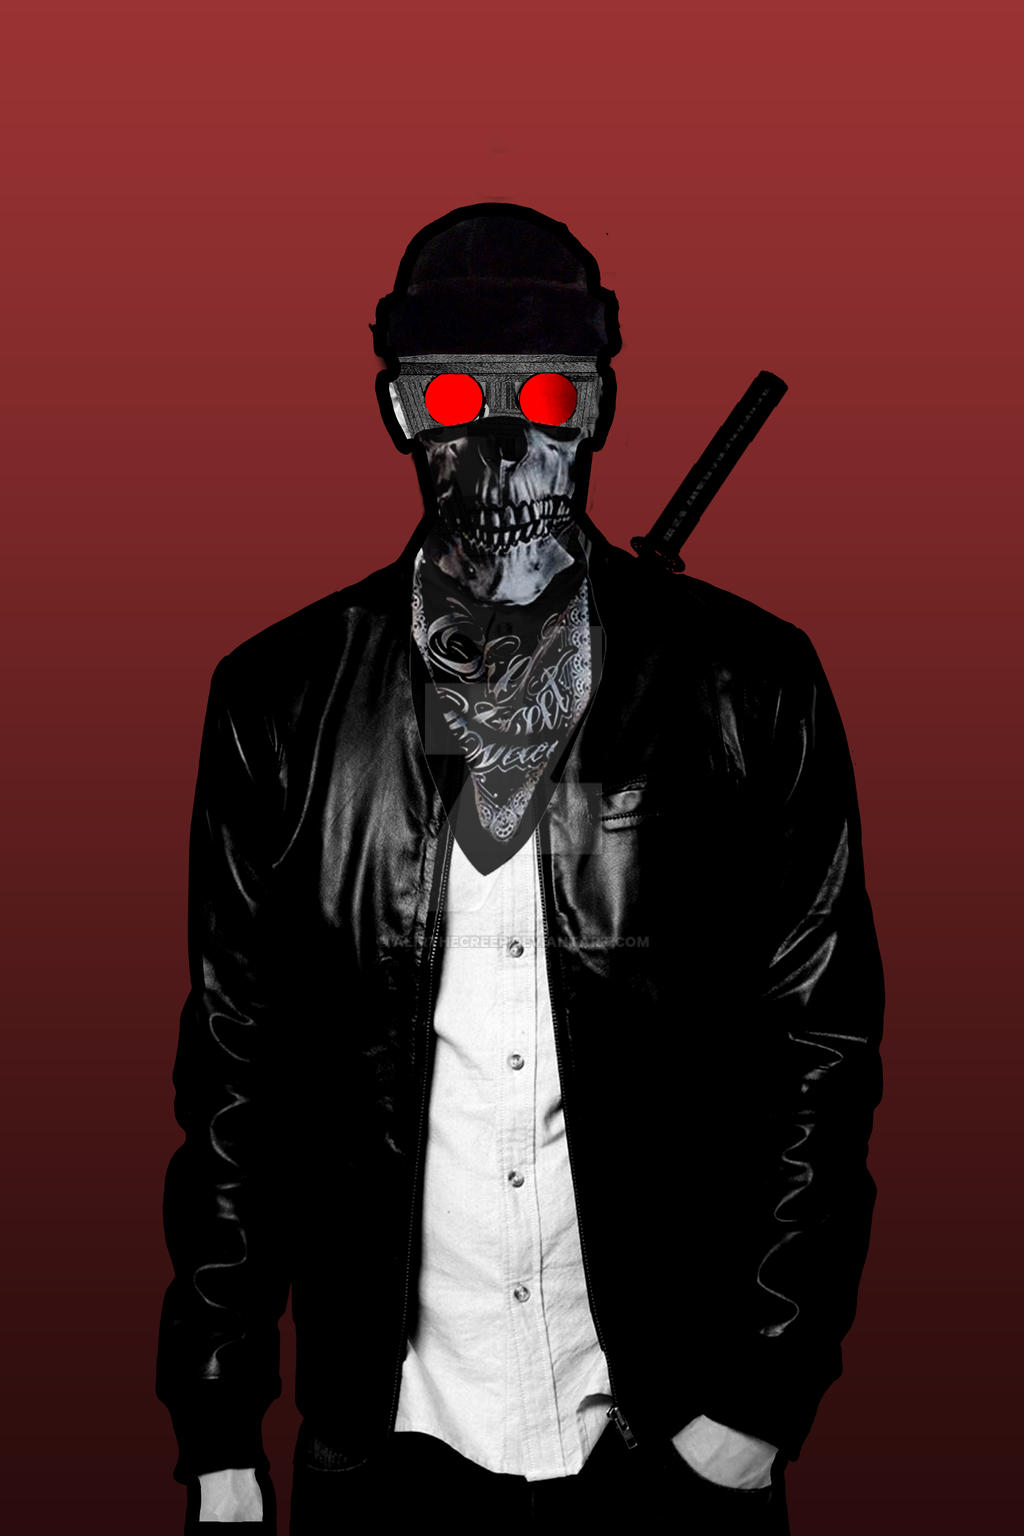 Hank from Madness Combat by Ginger60 on DeviantArt